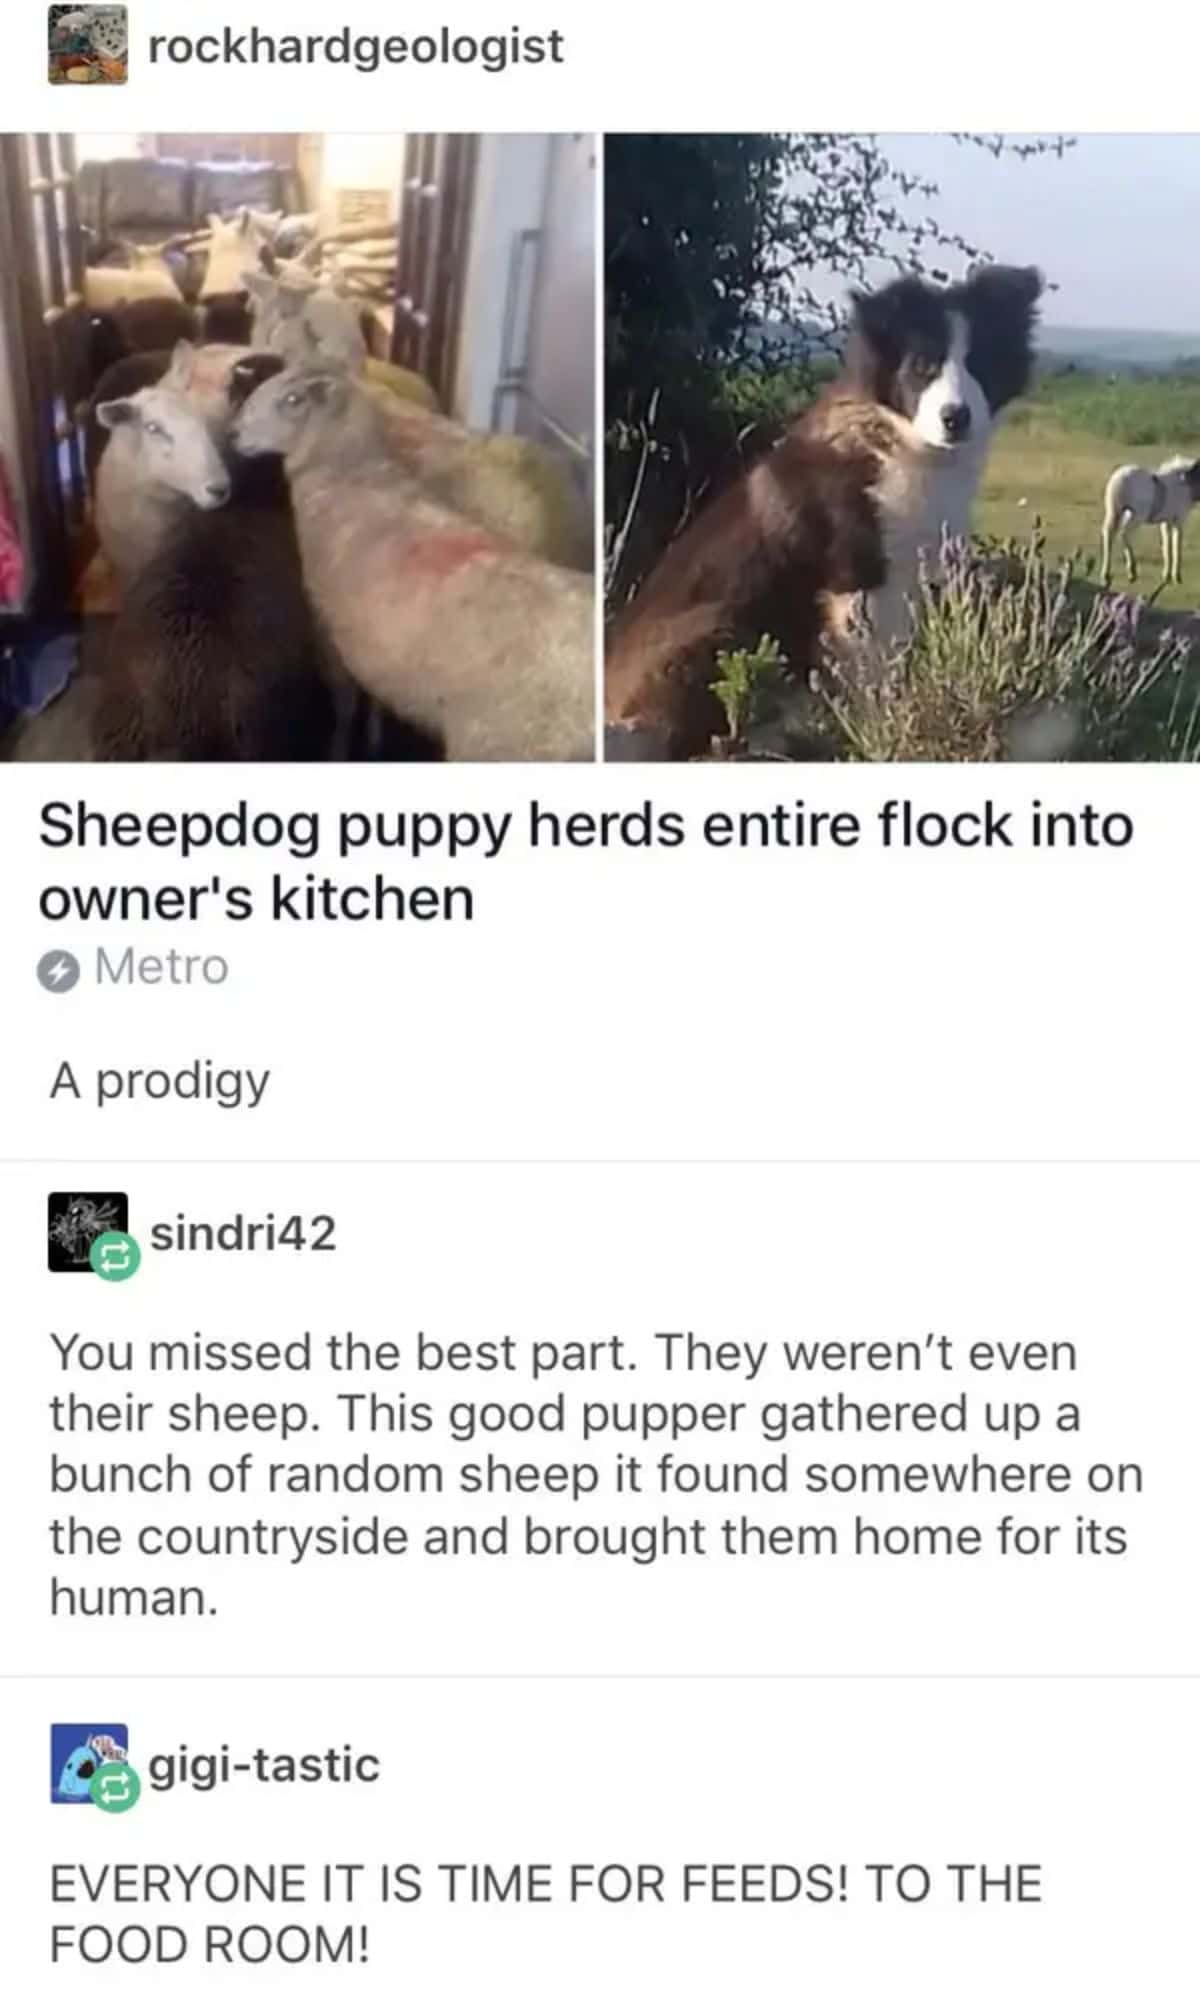 2 photos of sheep in a kitchen and a brown and white sheepdog puppy with caption saying the puppy herded random sheep into their kitchen